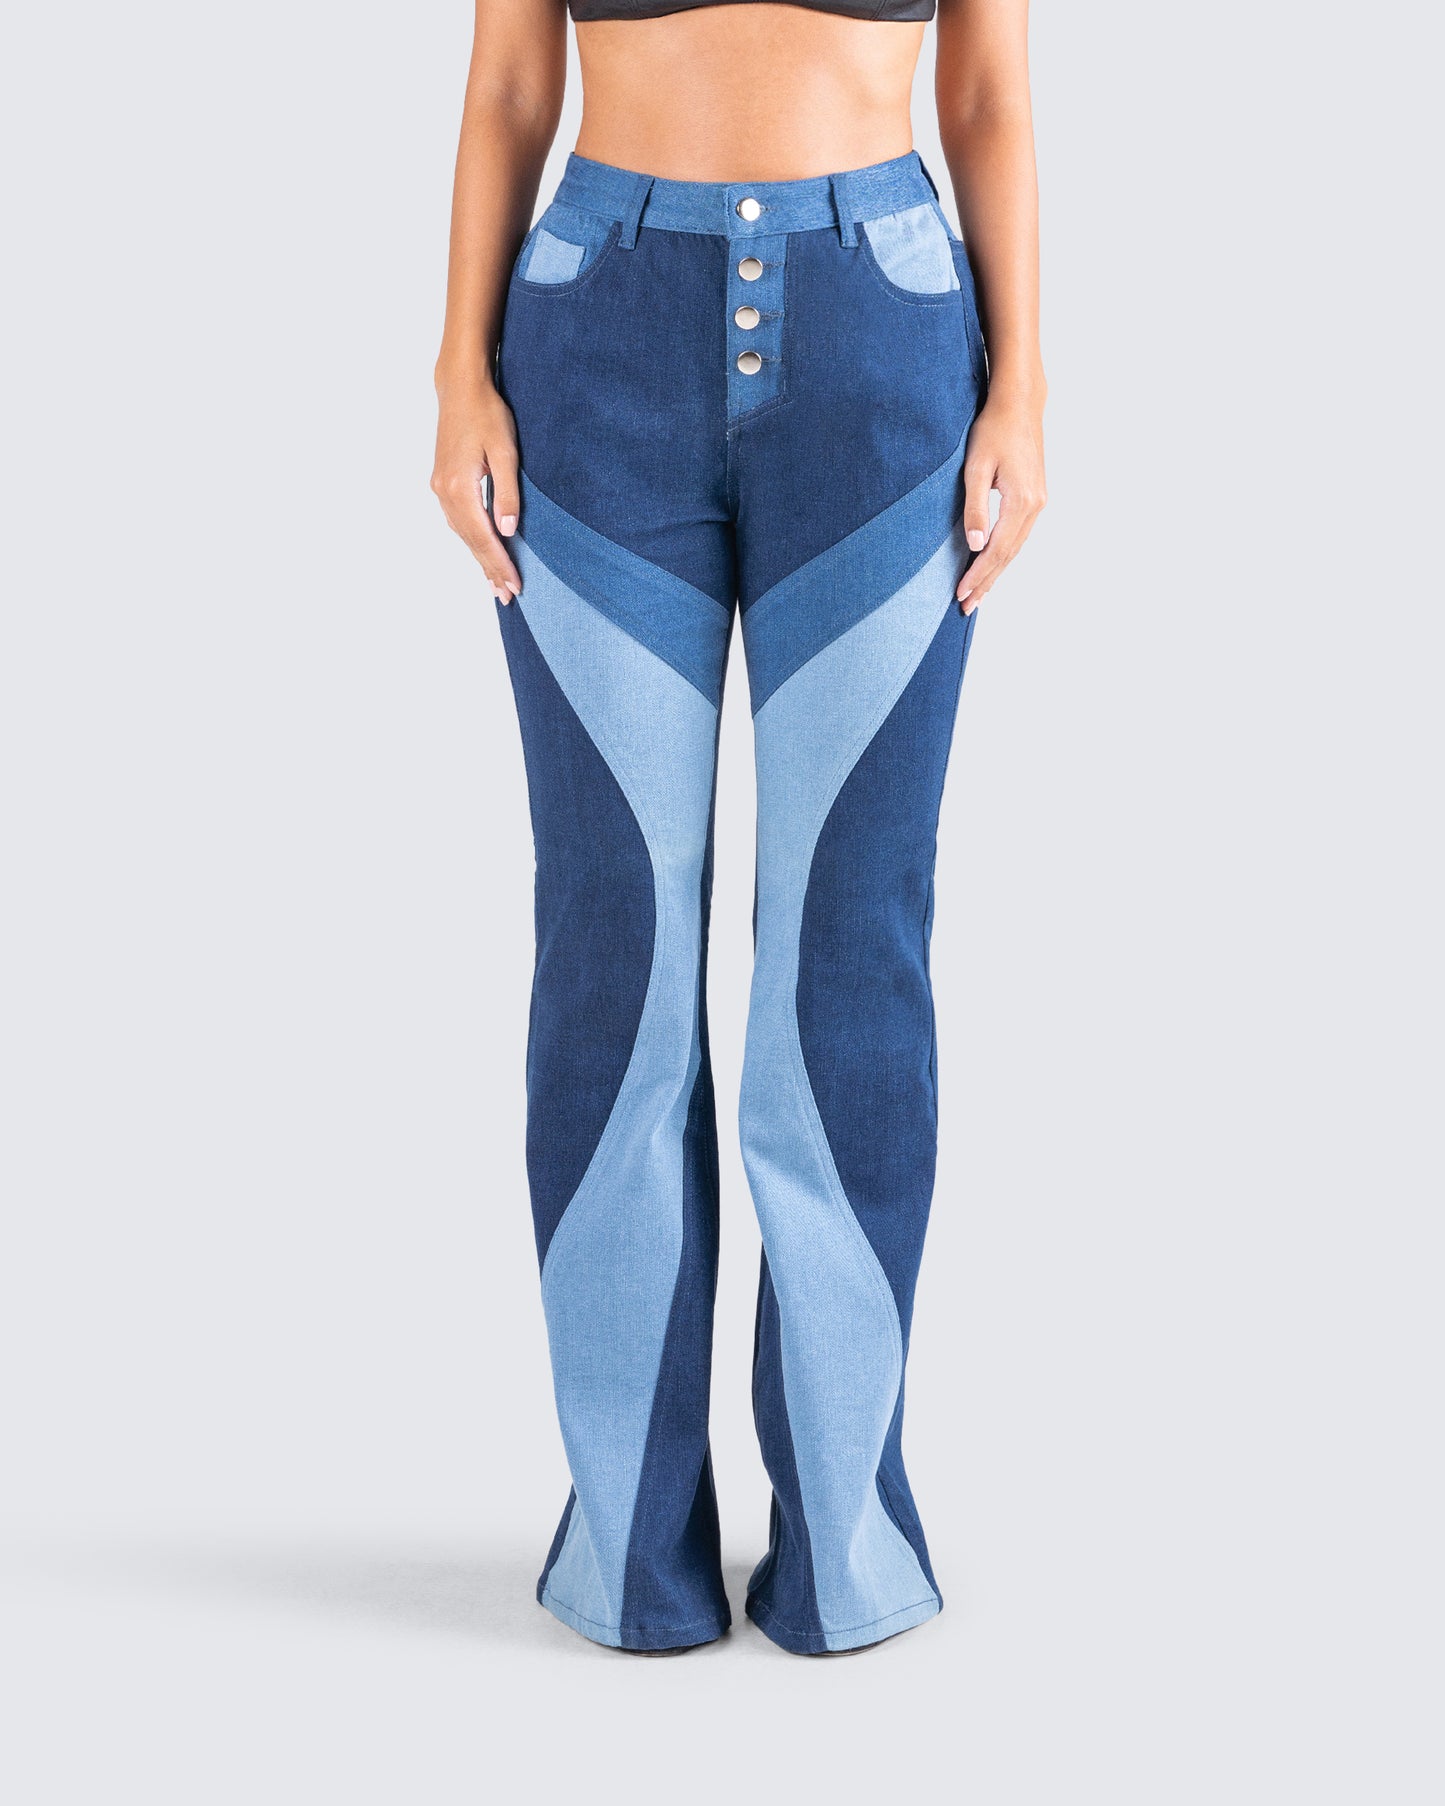 Mira Patterned Blue Jeans